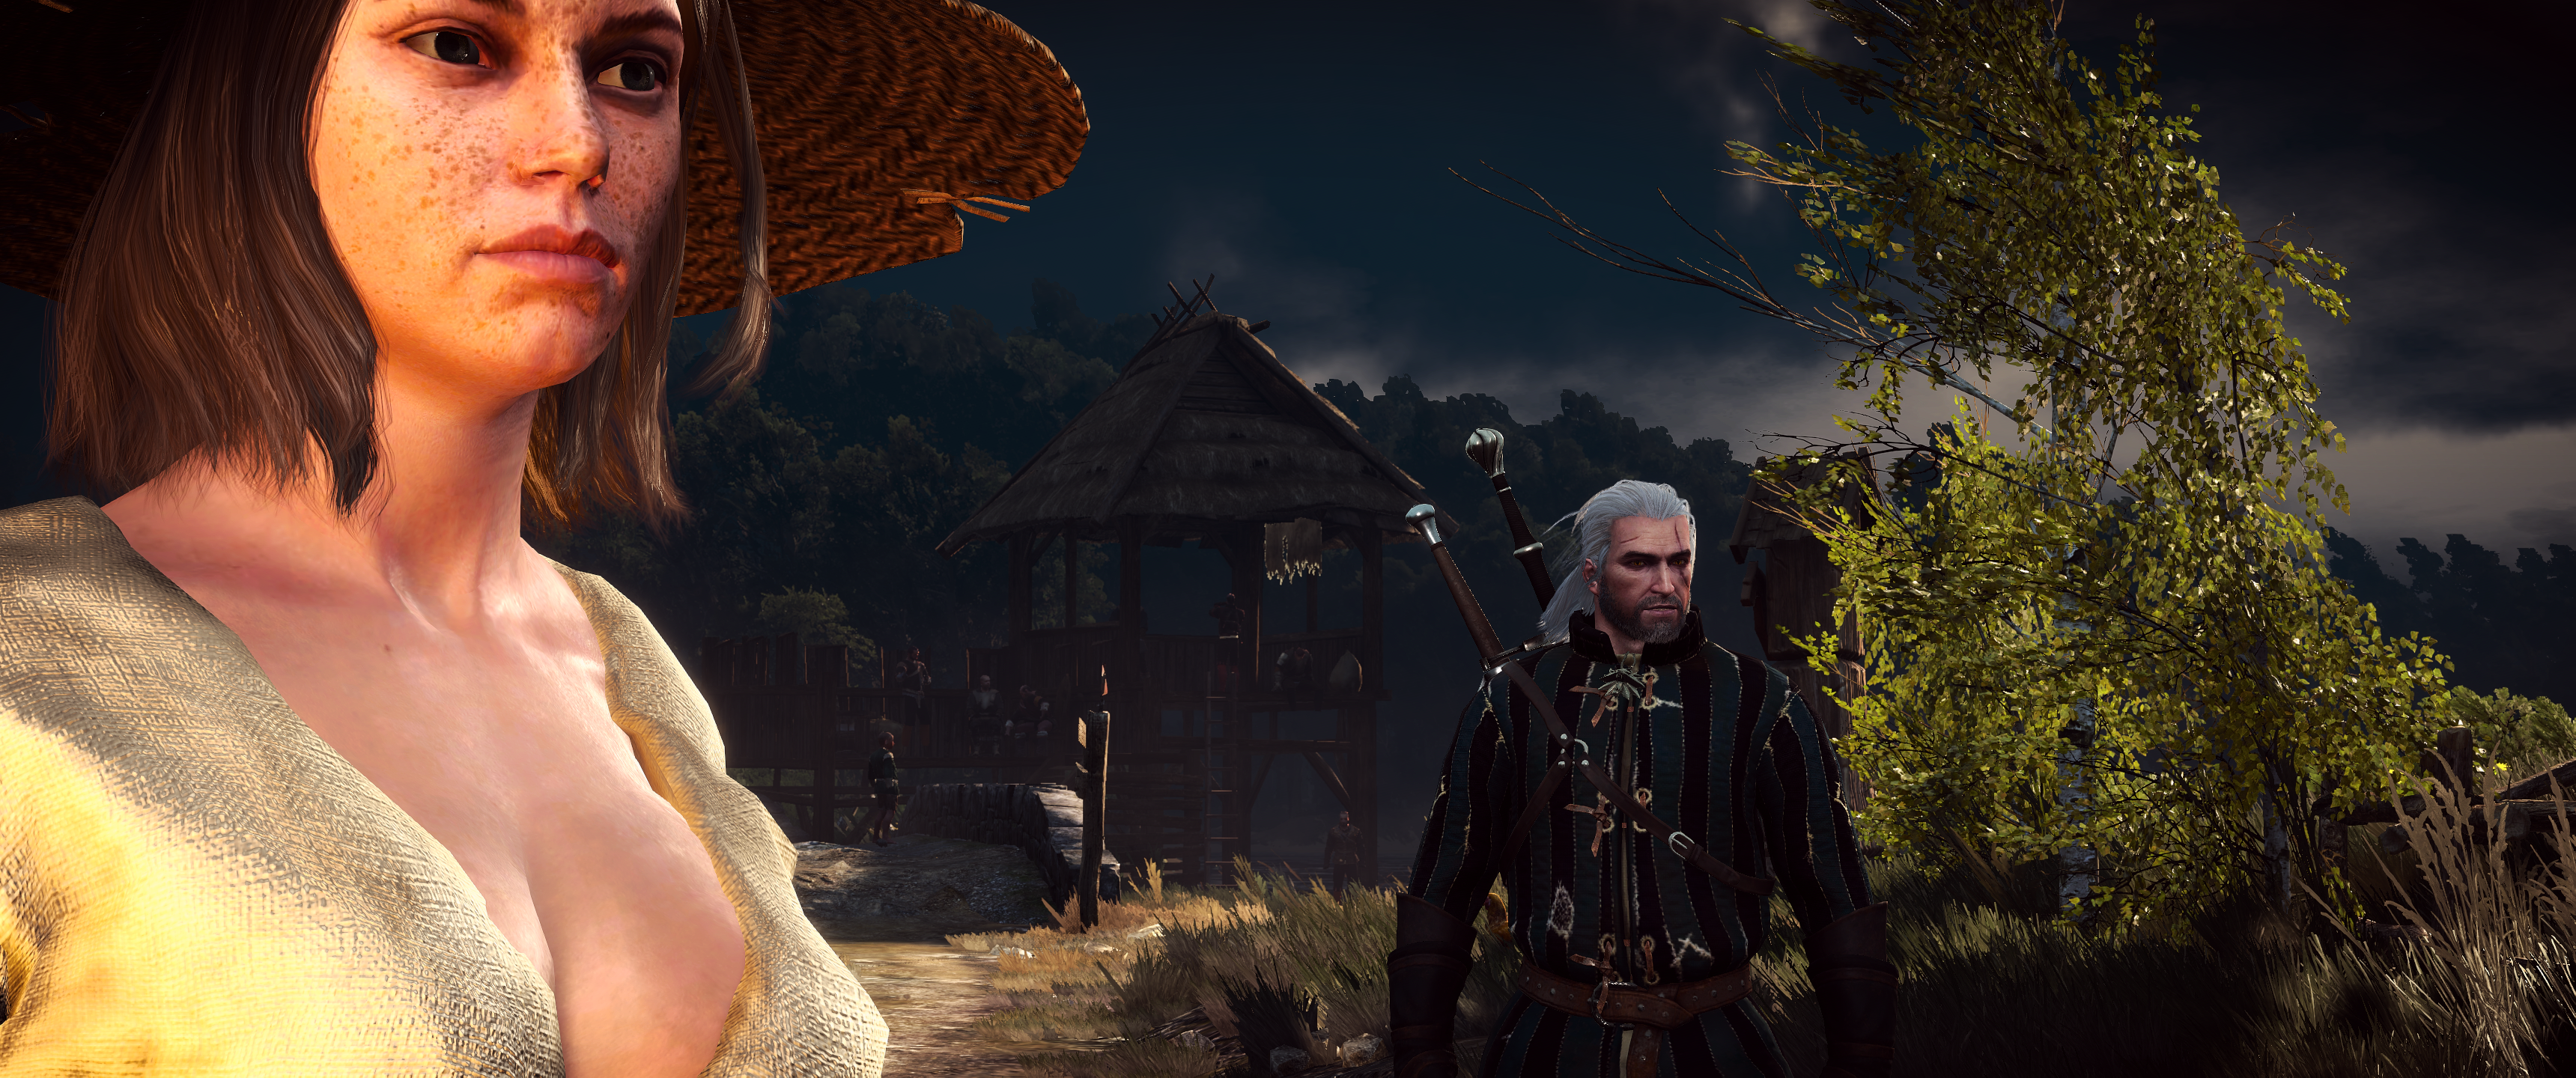 witcher3_2015_05_30_20gbj4.png